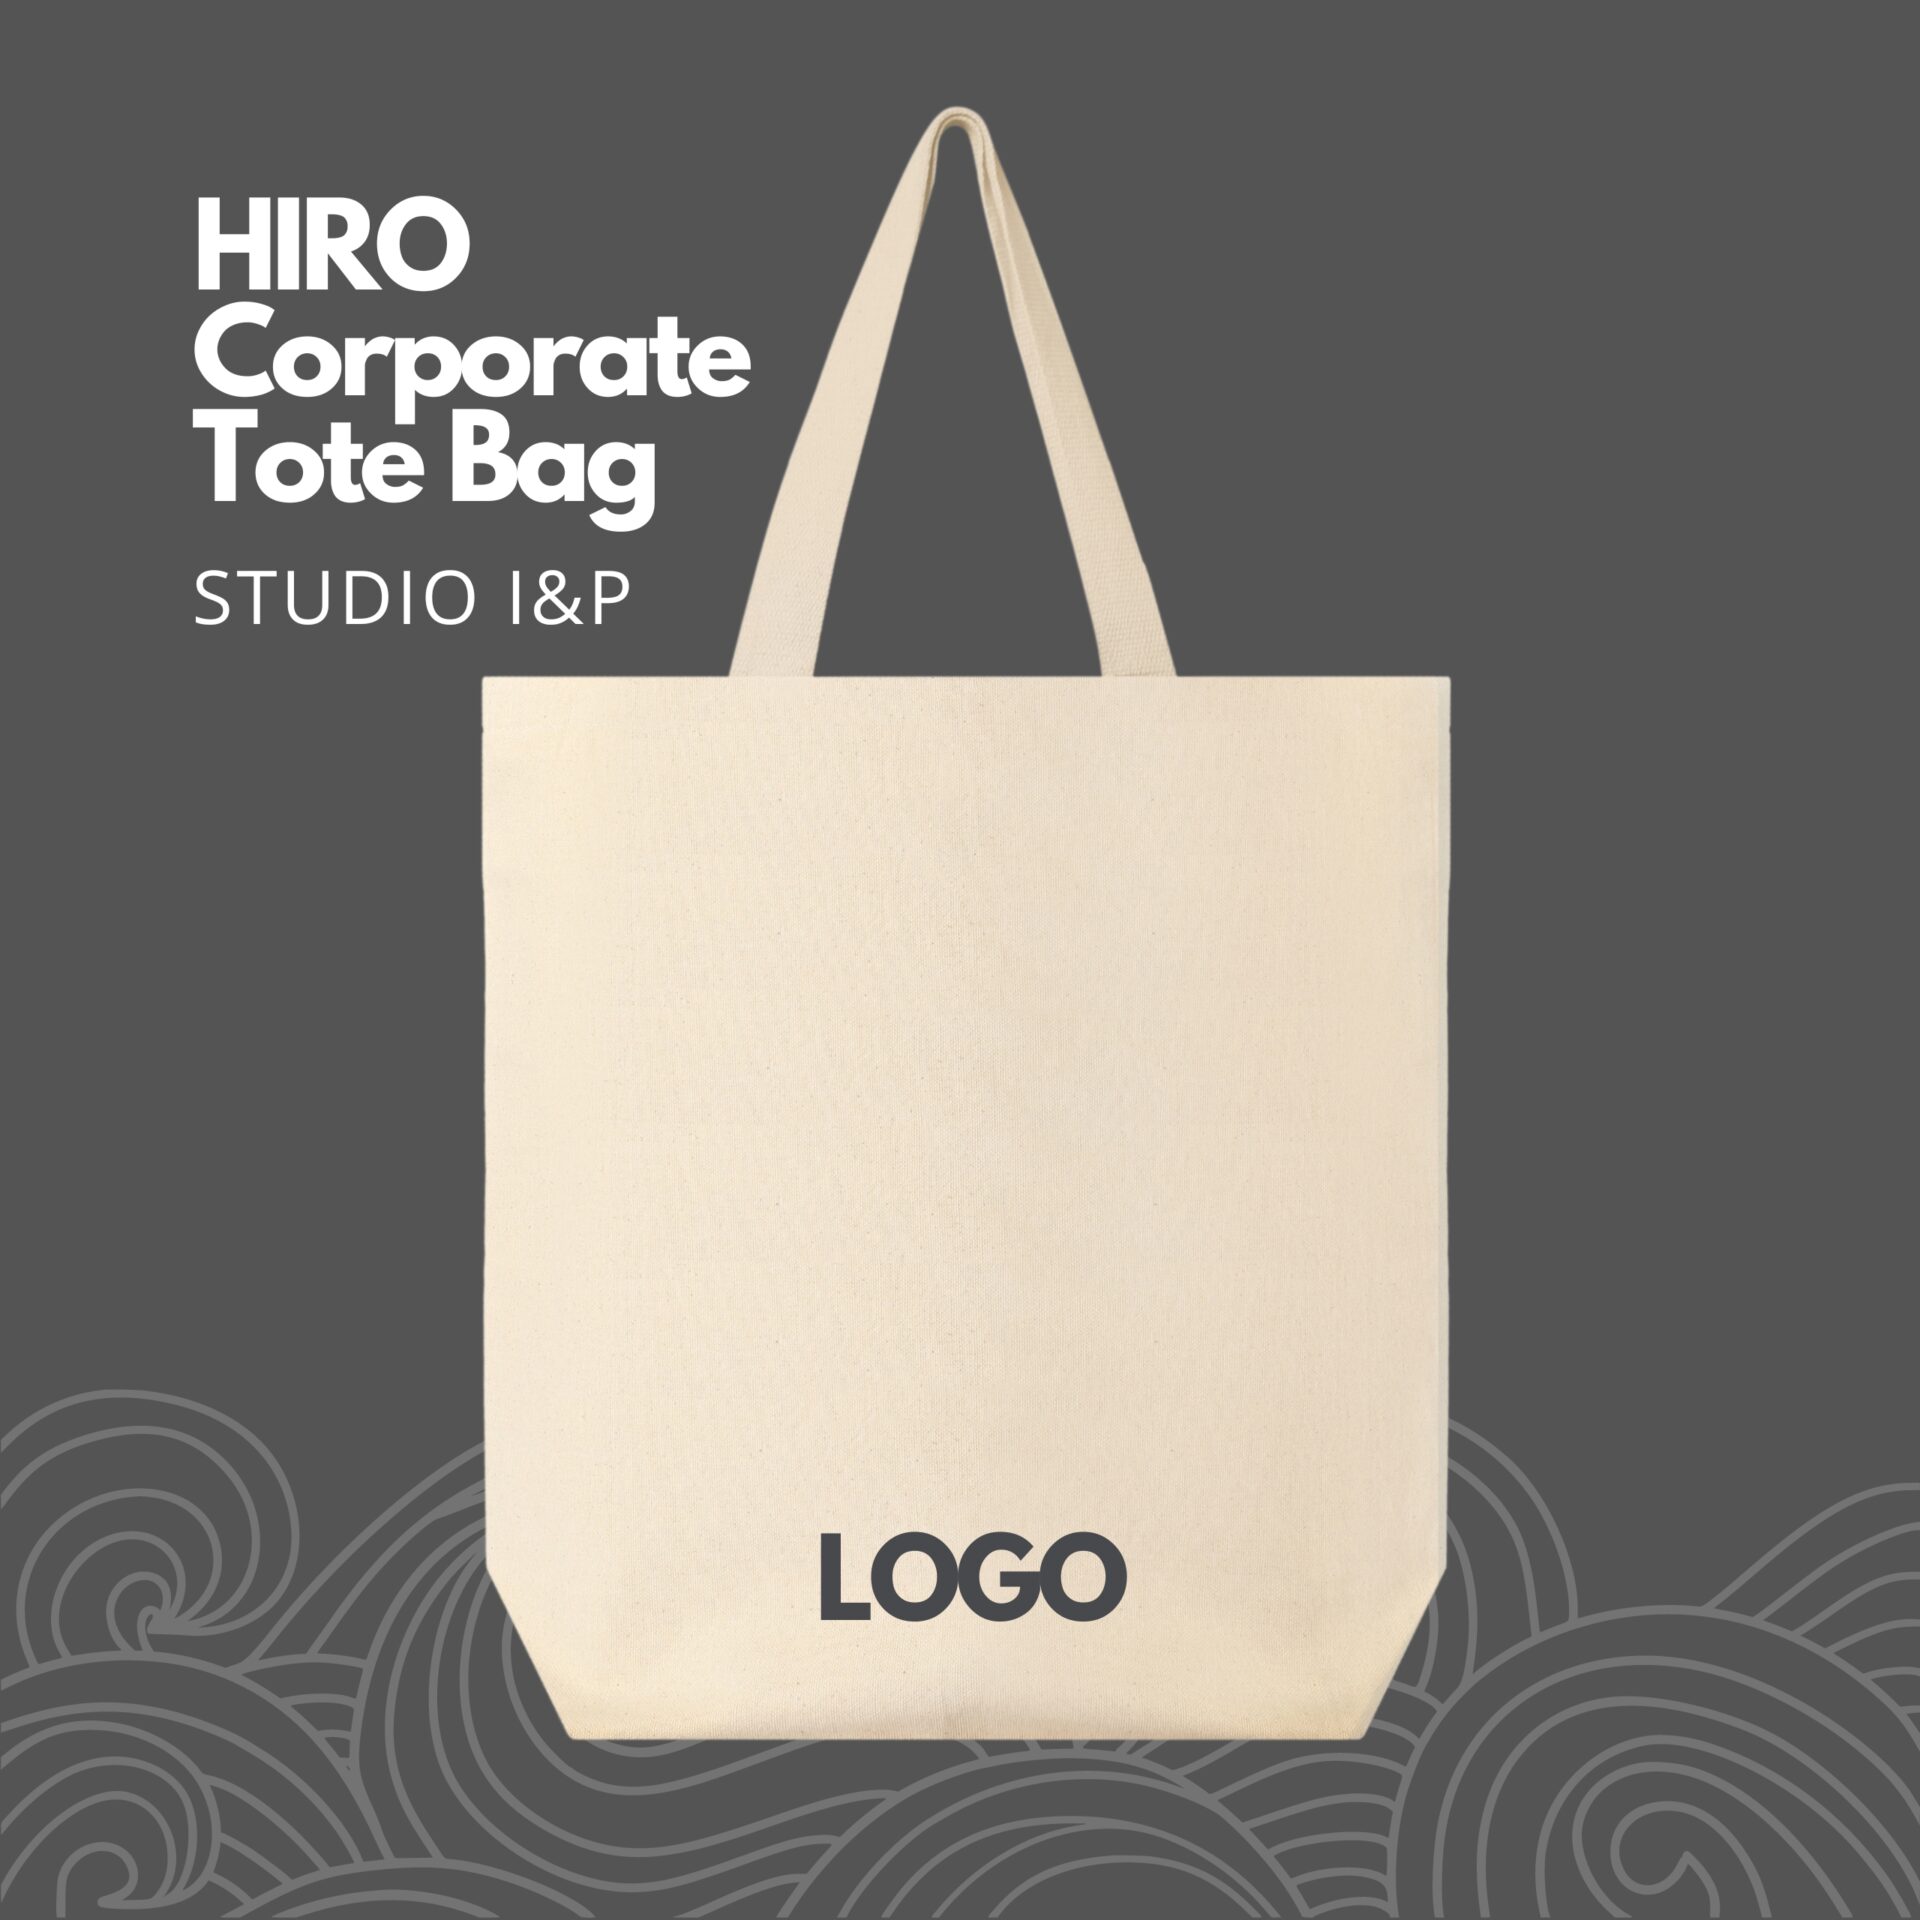 corporate gifts singapore tote bag customised